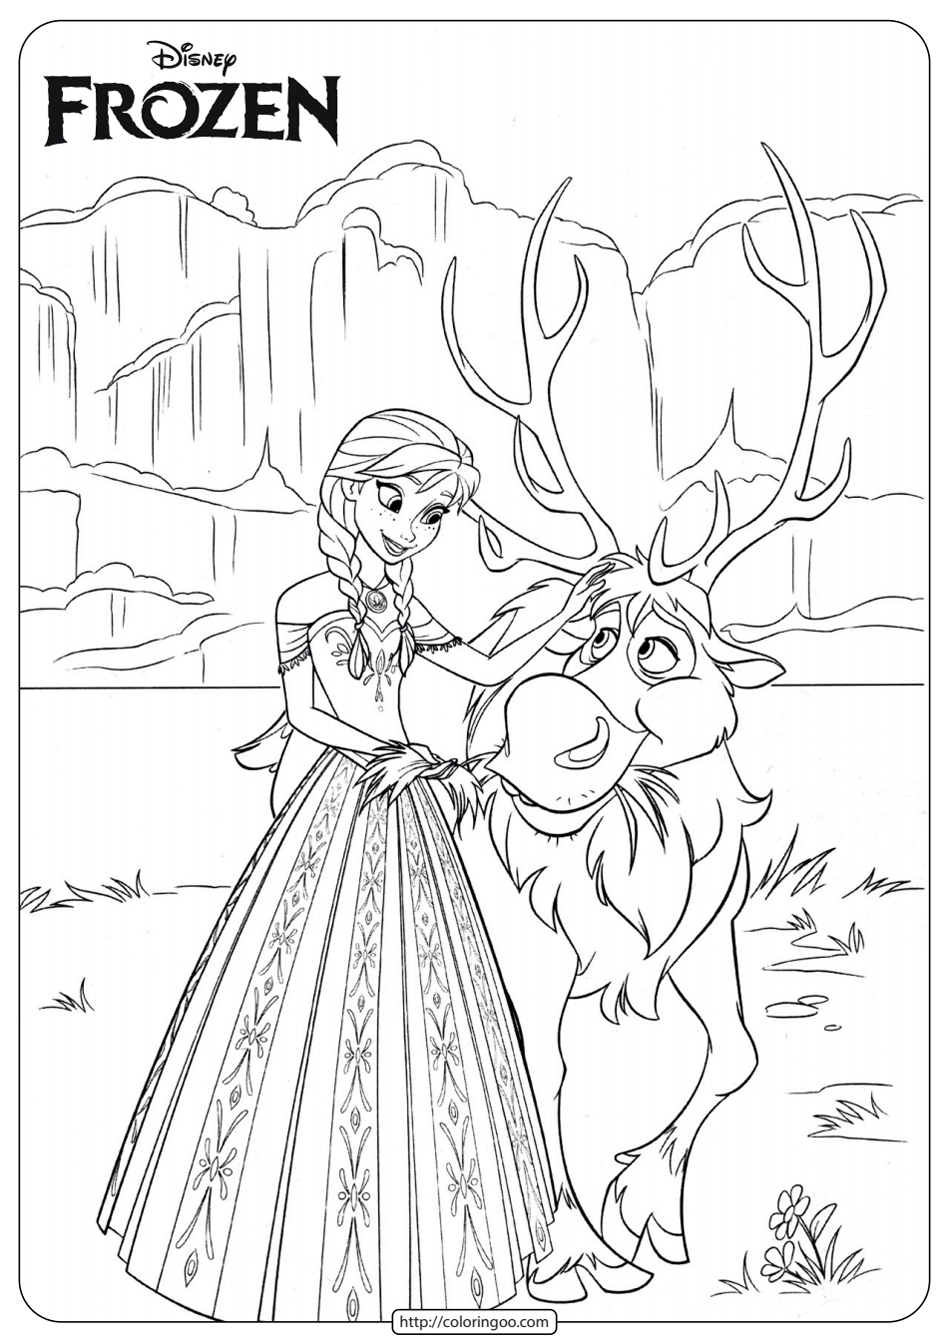 disney frozen anna and sven coloring pages